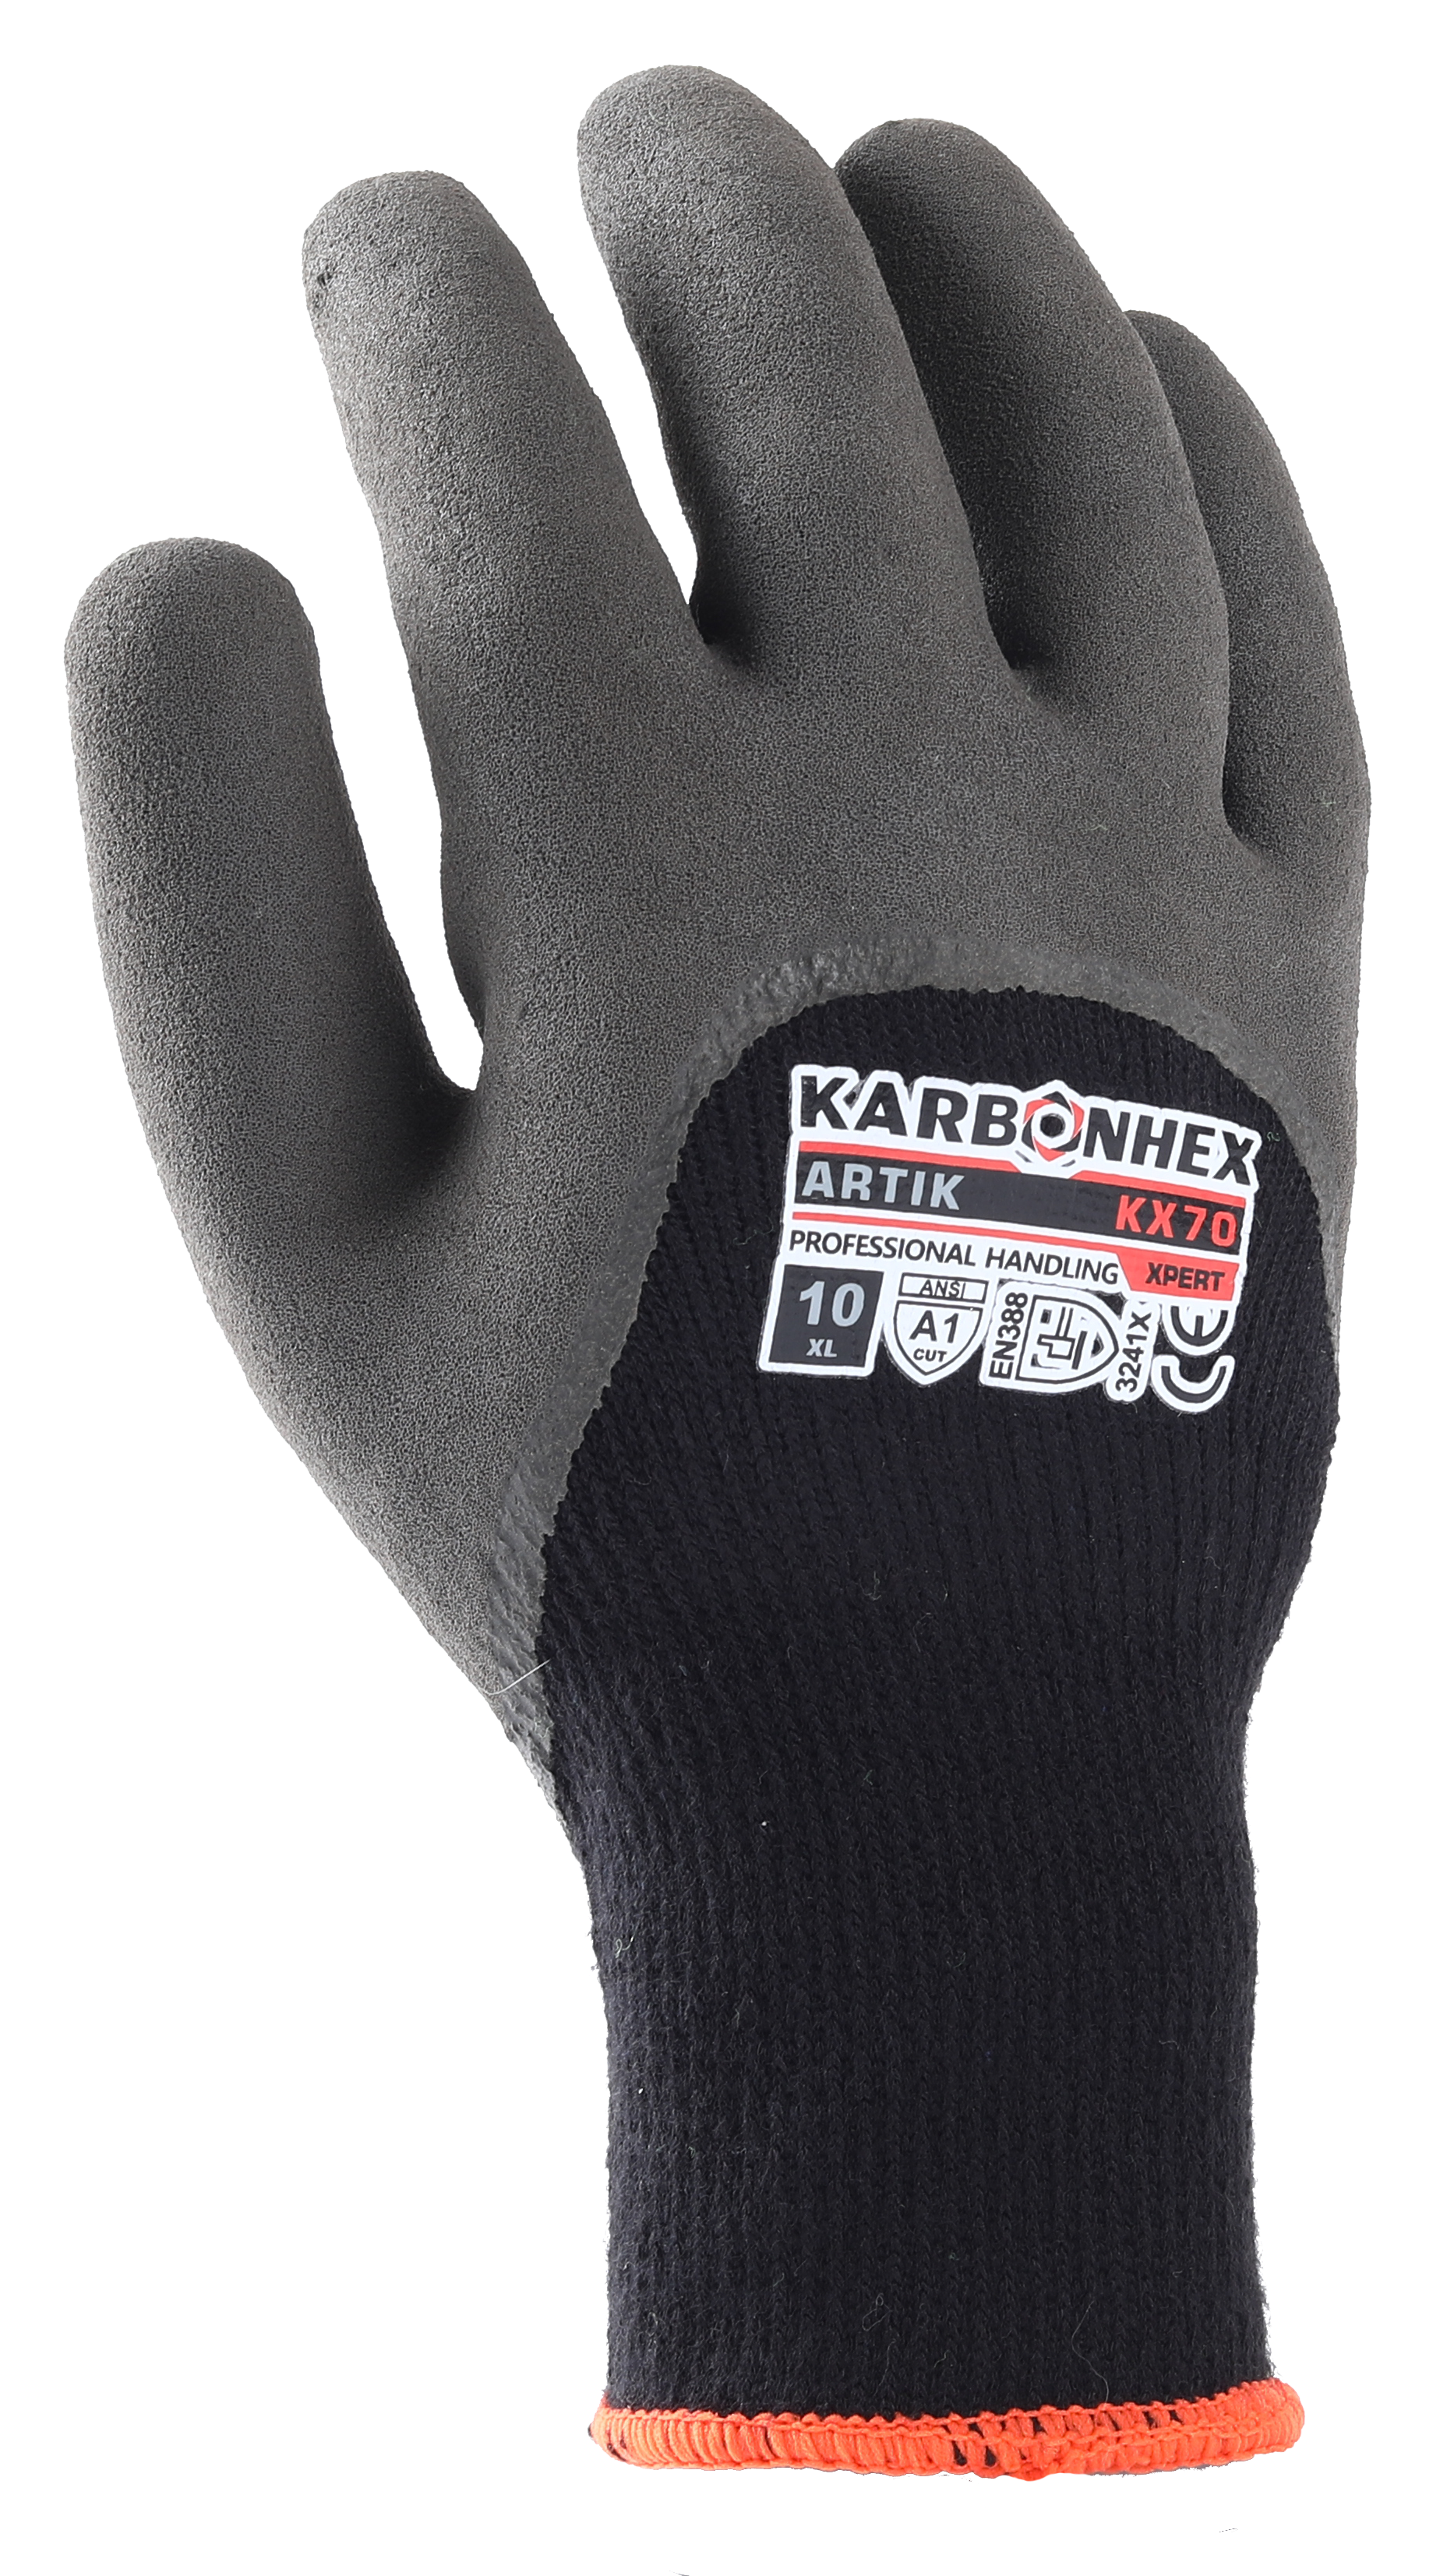 KarbonHex® KX70 by SW® Professional Built Cut-Resistant Winter Gloves with Cold Protection (Pack of 12)